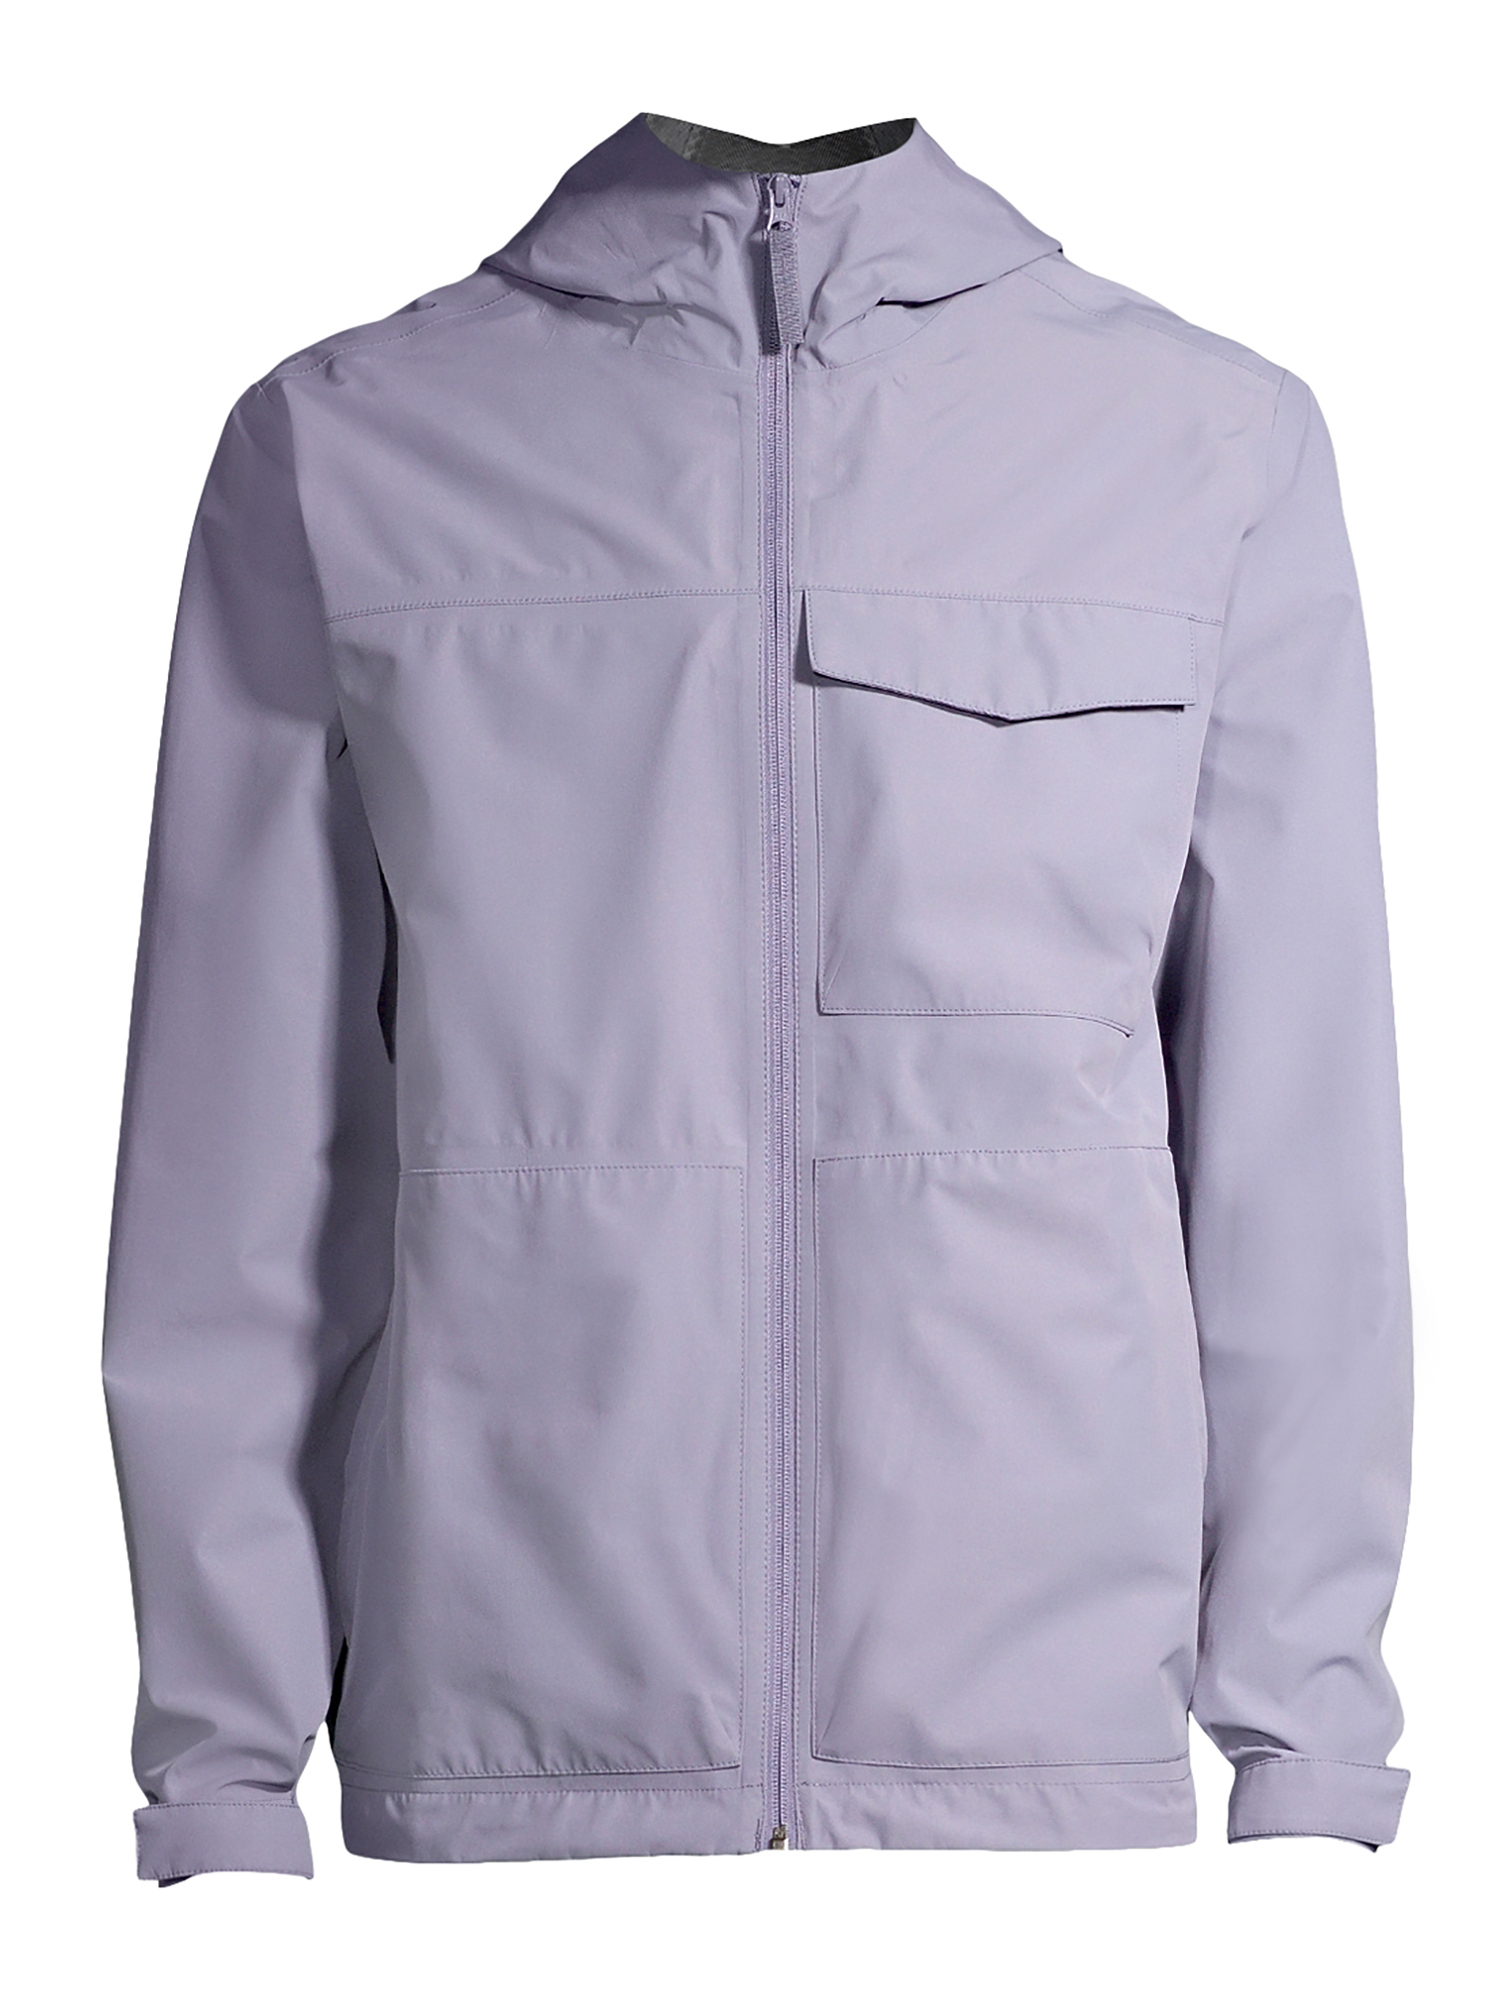 Free Assembly Men's Waterproof Shell Jacket - image 4 of 6